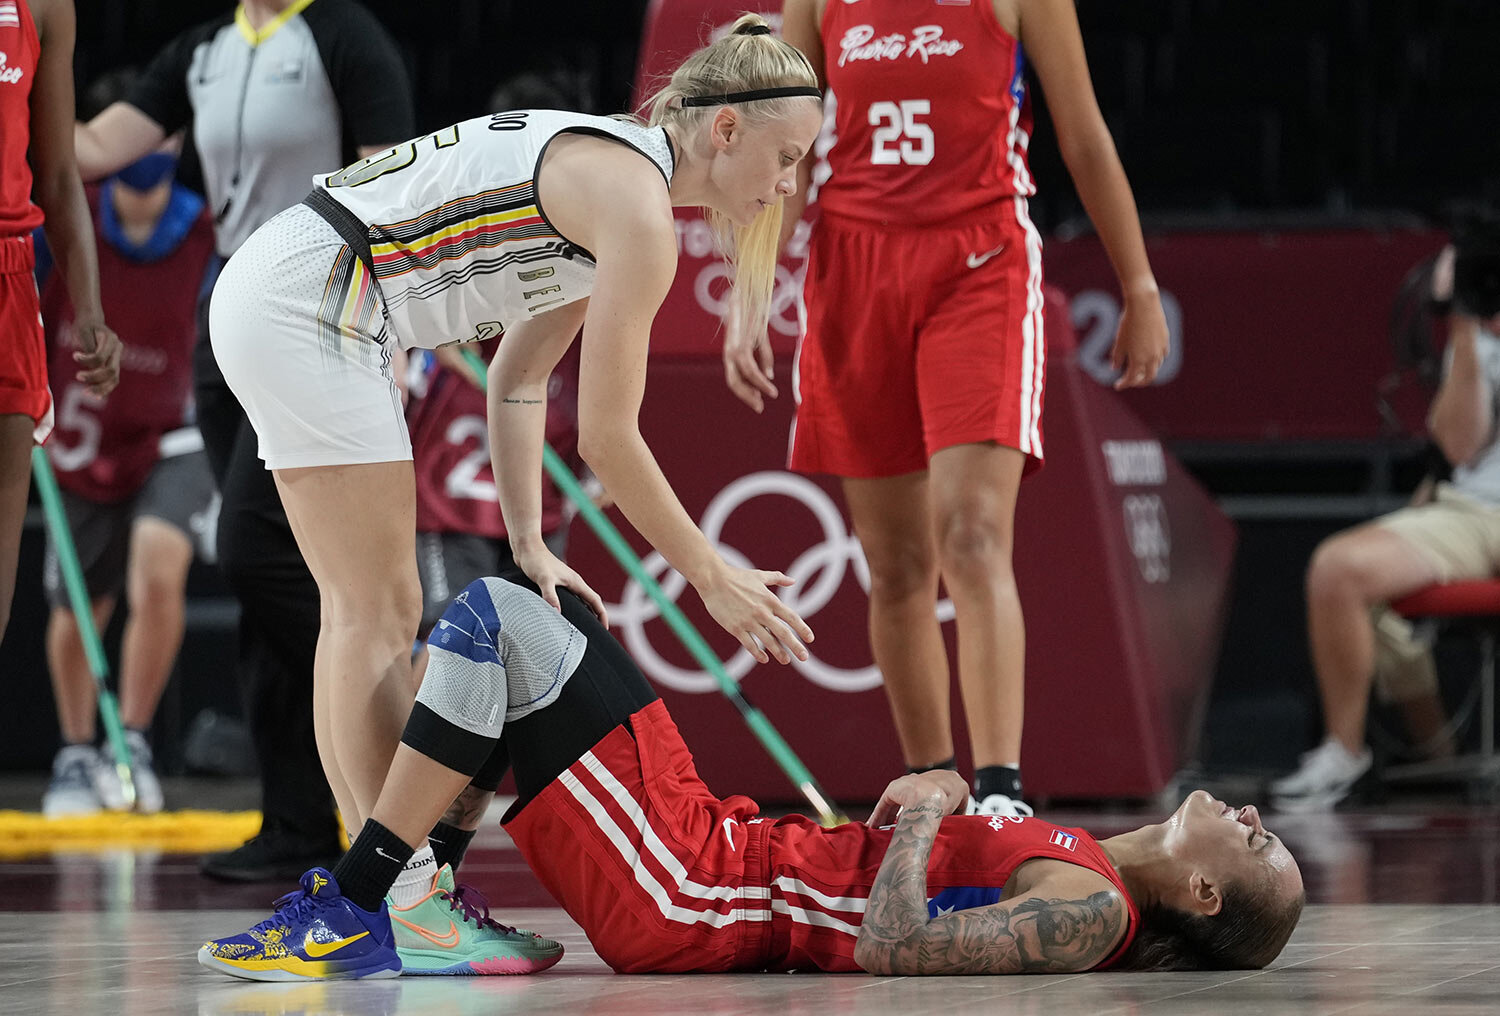  Belgium's Julie Vanloo (35), left, offers help to Puerto Rico's Jazmon Gwathmey (24) during women's basketball preliminary round game between Belgium and Puerto Rico at the 2020 Summer Olympics, Friday, July 30, 2021, in Saitama, Japan. (AP Photo/Er